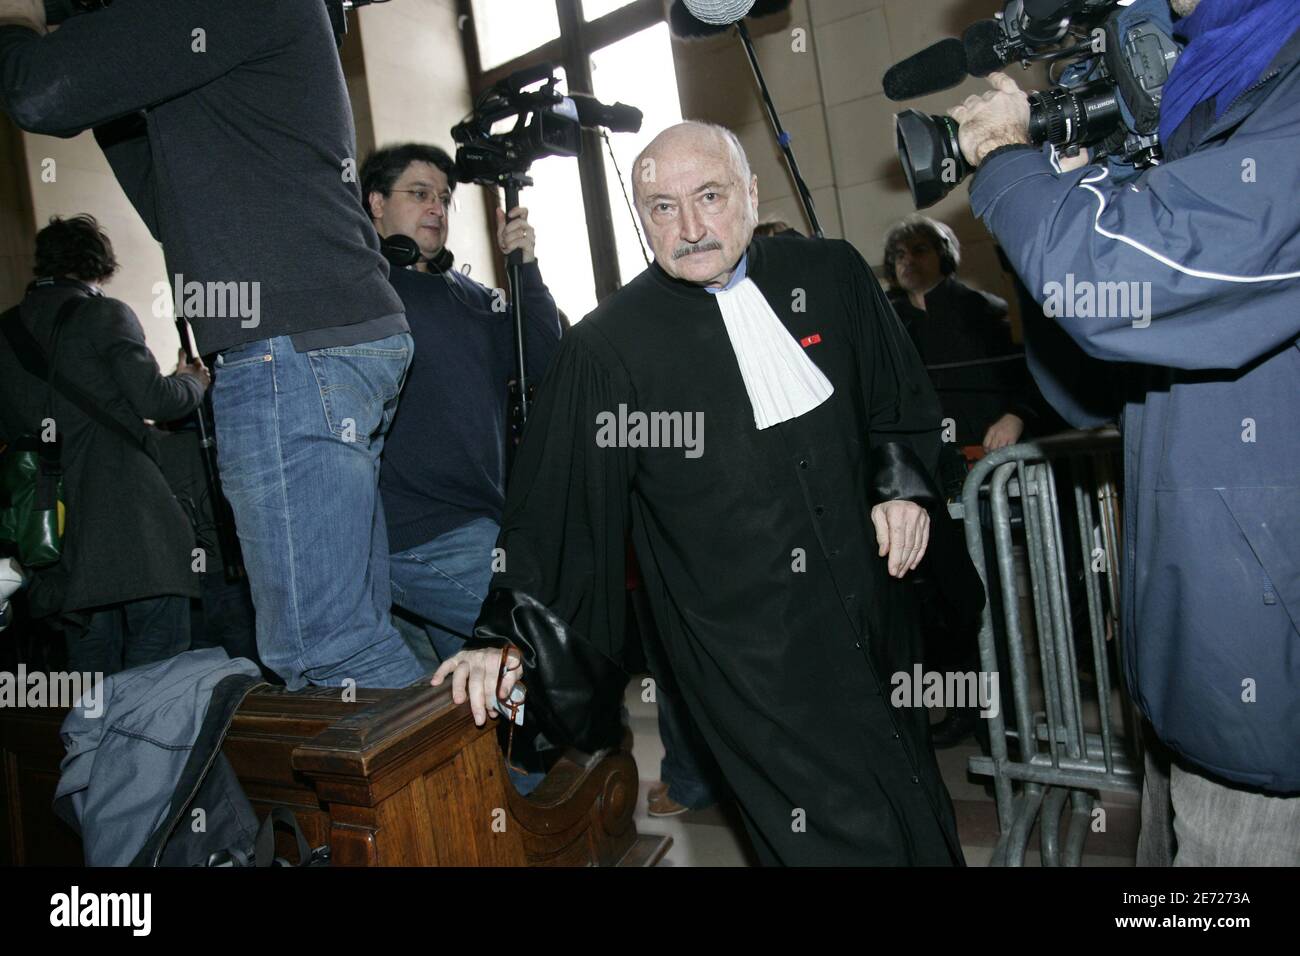 Georges Kiejman, the lawyer of Charlie Hebdo at the Court of Paris during the lawsuit against Charlie Hebdo, French satirical weekly magazine which printed cartoons of the Prophet Muhammad, in Paris, France on February 8, 2007. Photo by Thibault Camus/ABACAPRESS Stock Photo